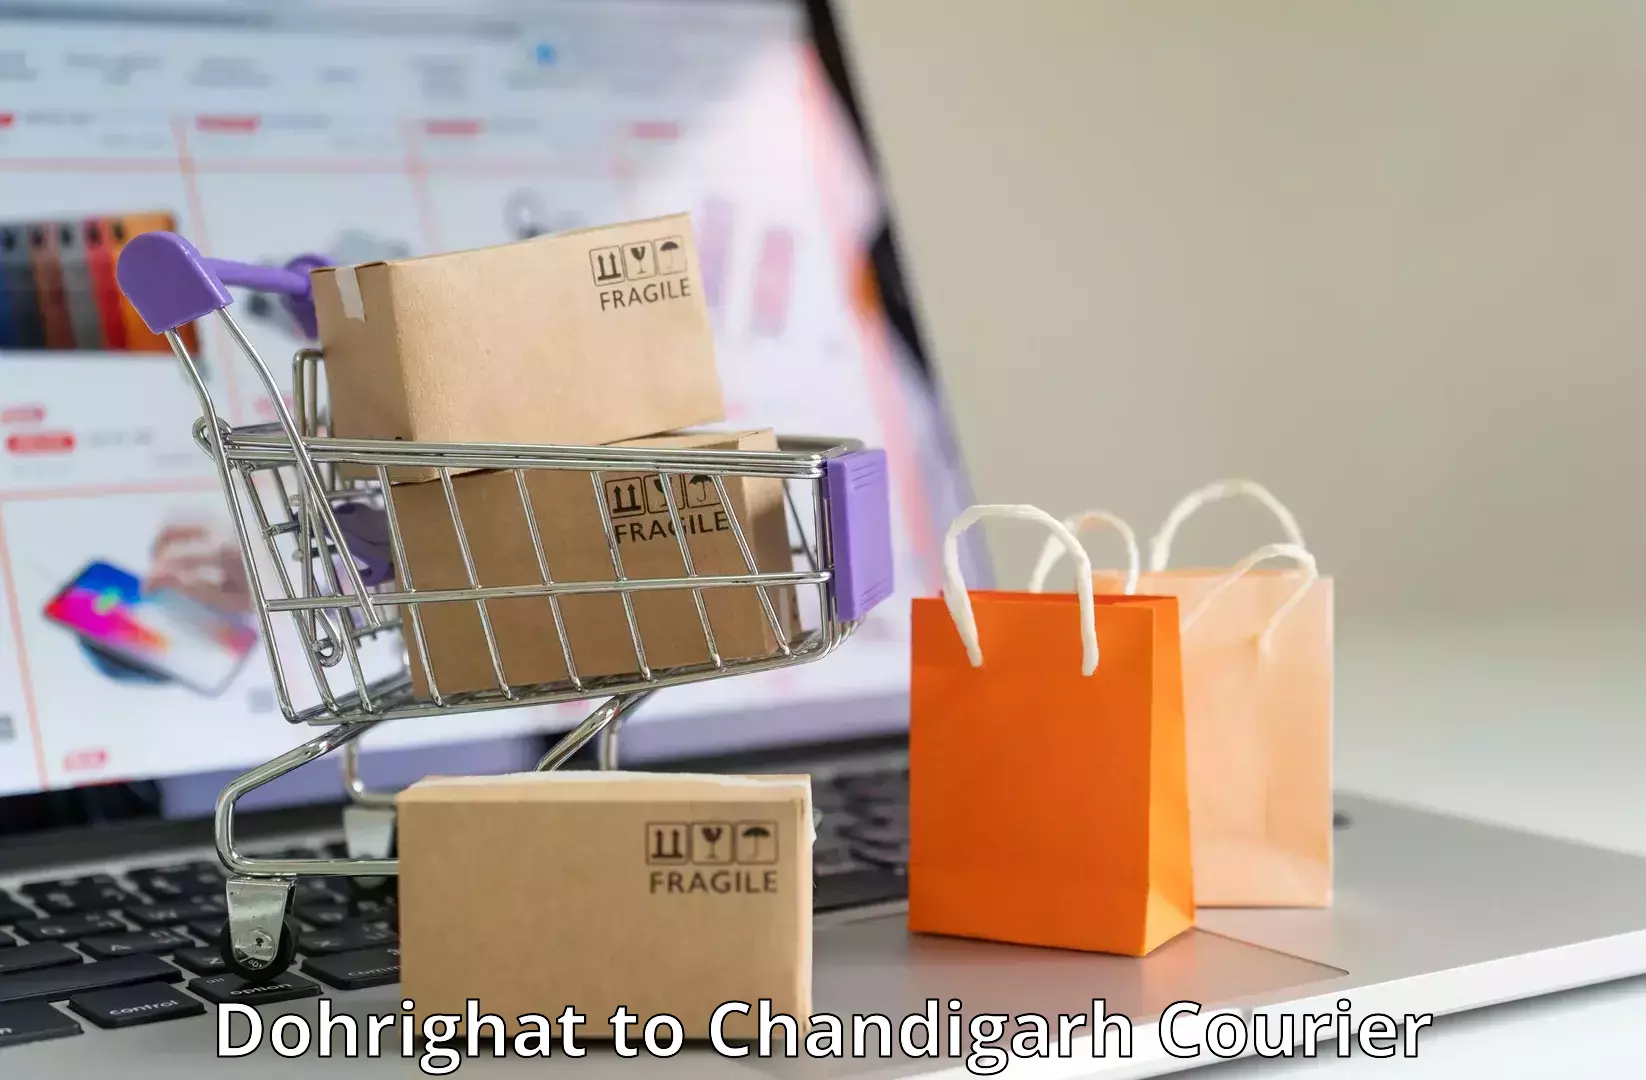 Courier service partnerships Dohrighat to Chandigarh